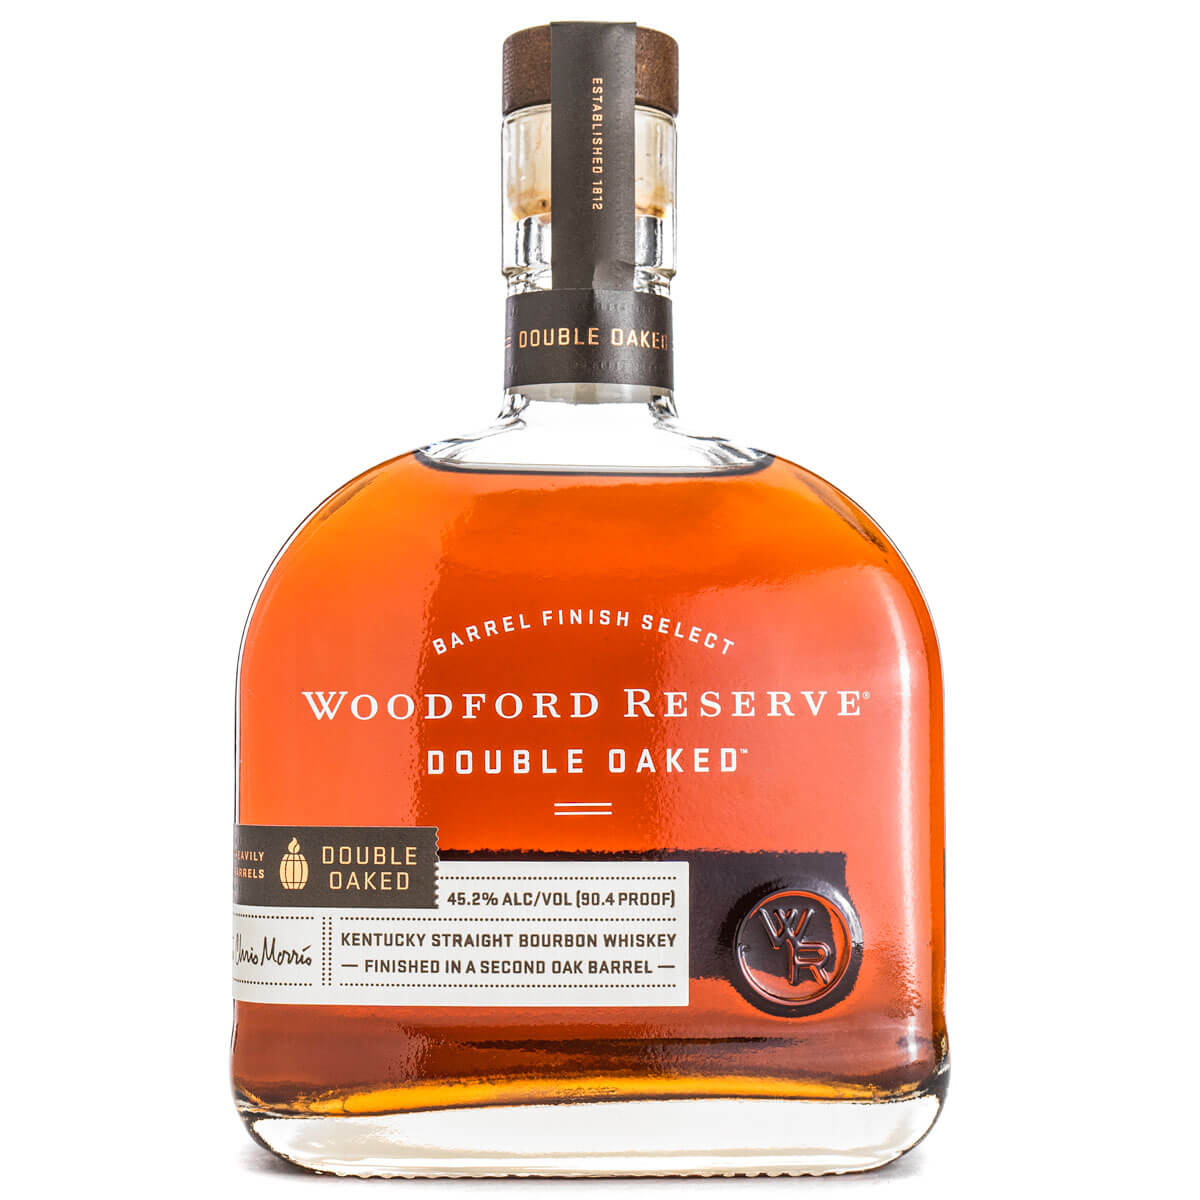 Woodford Reserve Double Oaked bottle